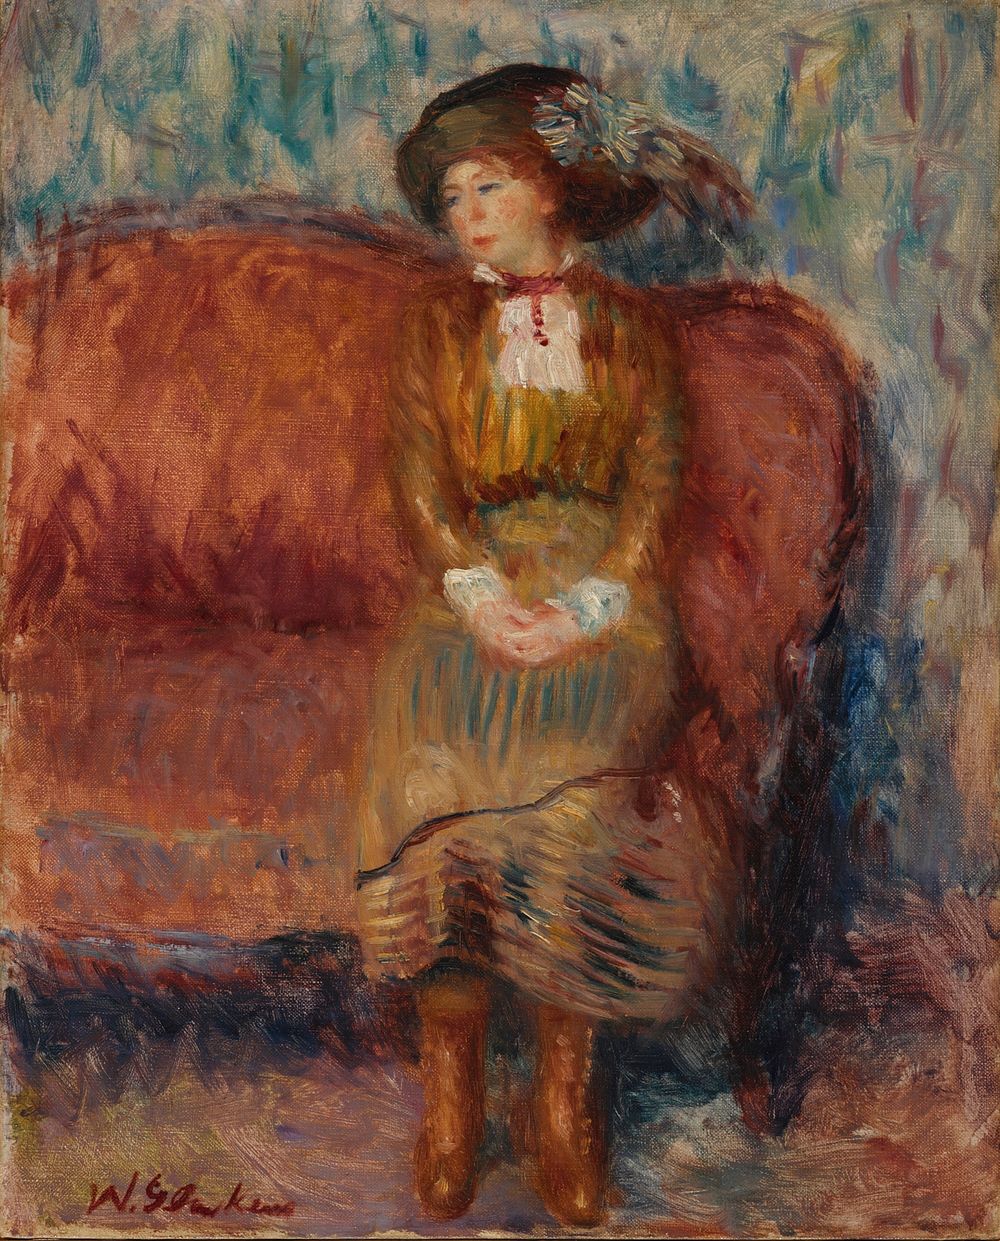 Woman Seated on Red Sofa by William James Glackens